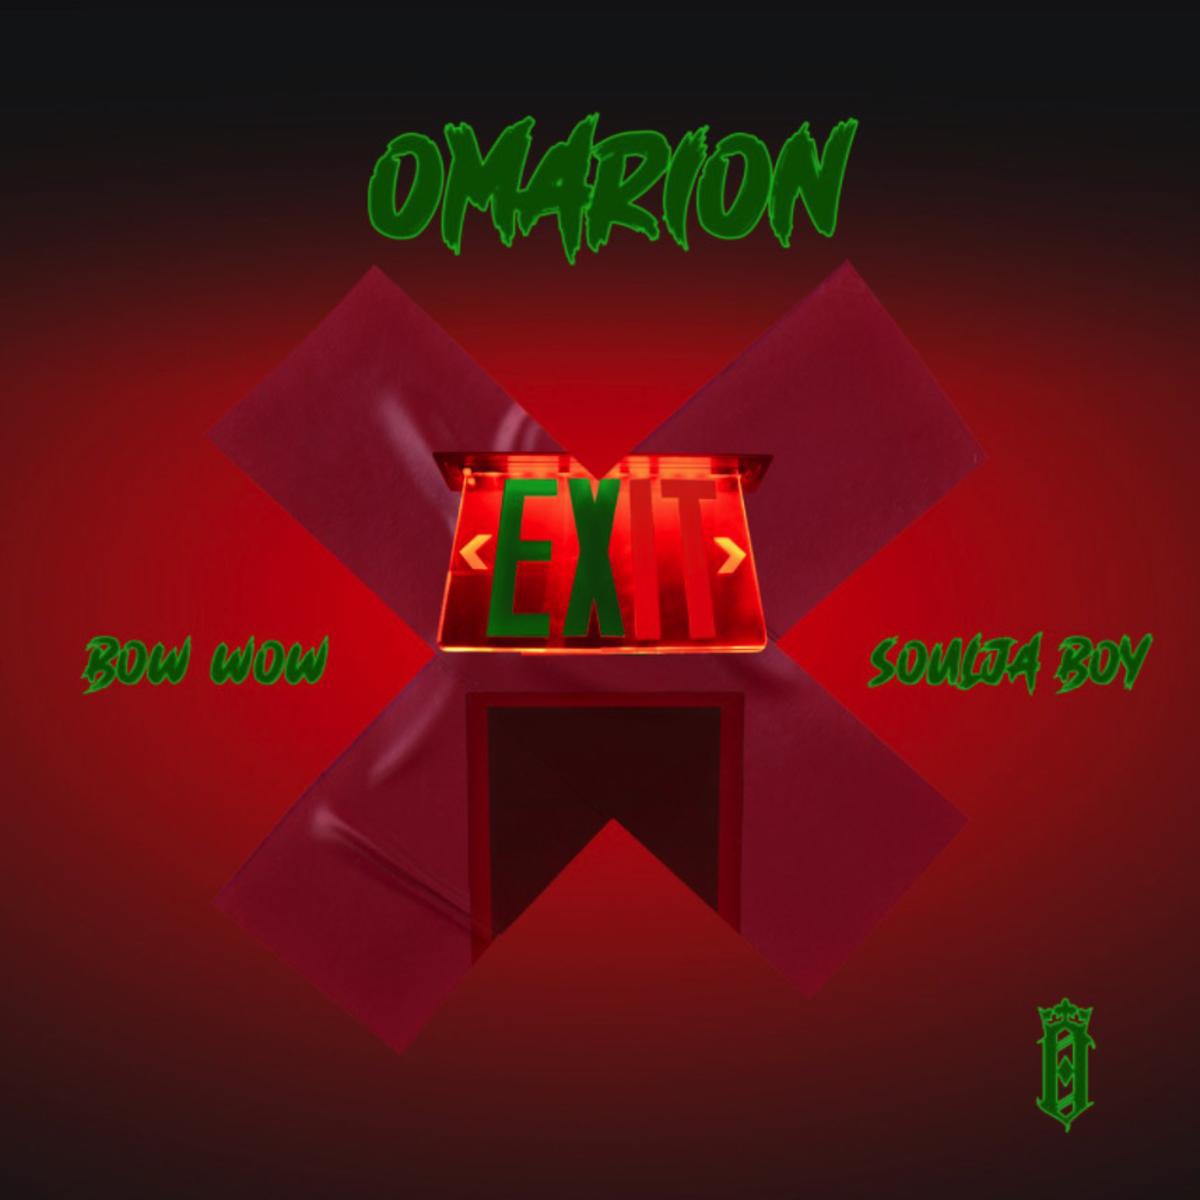 Omarion Calls On Bow Wow & Soulja Boy For “Ex”